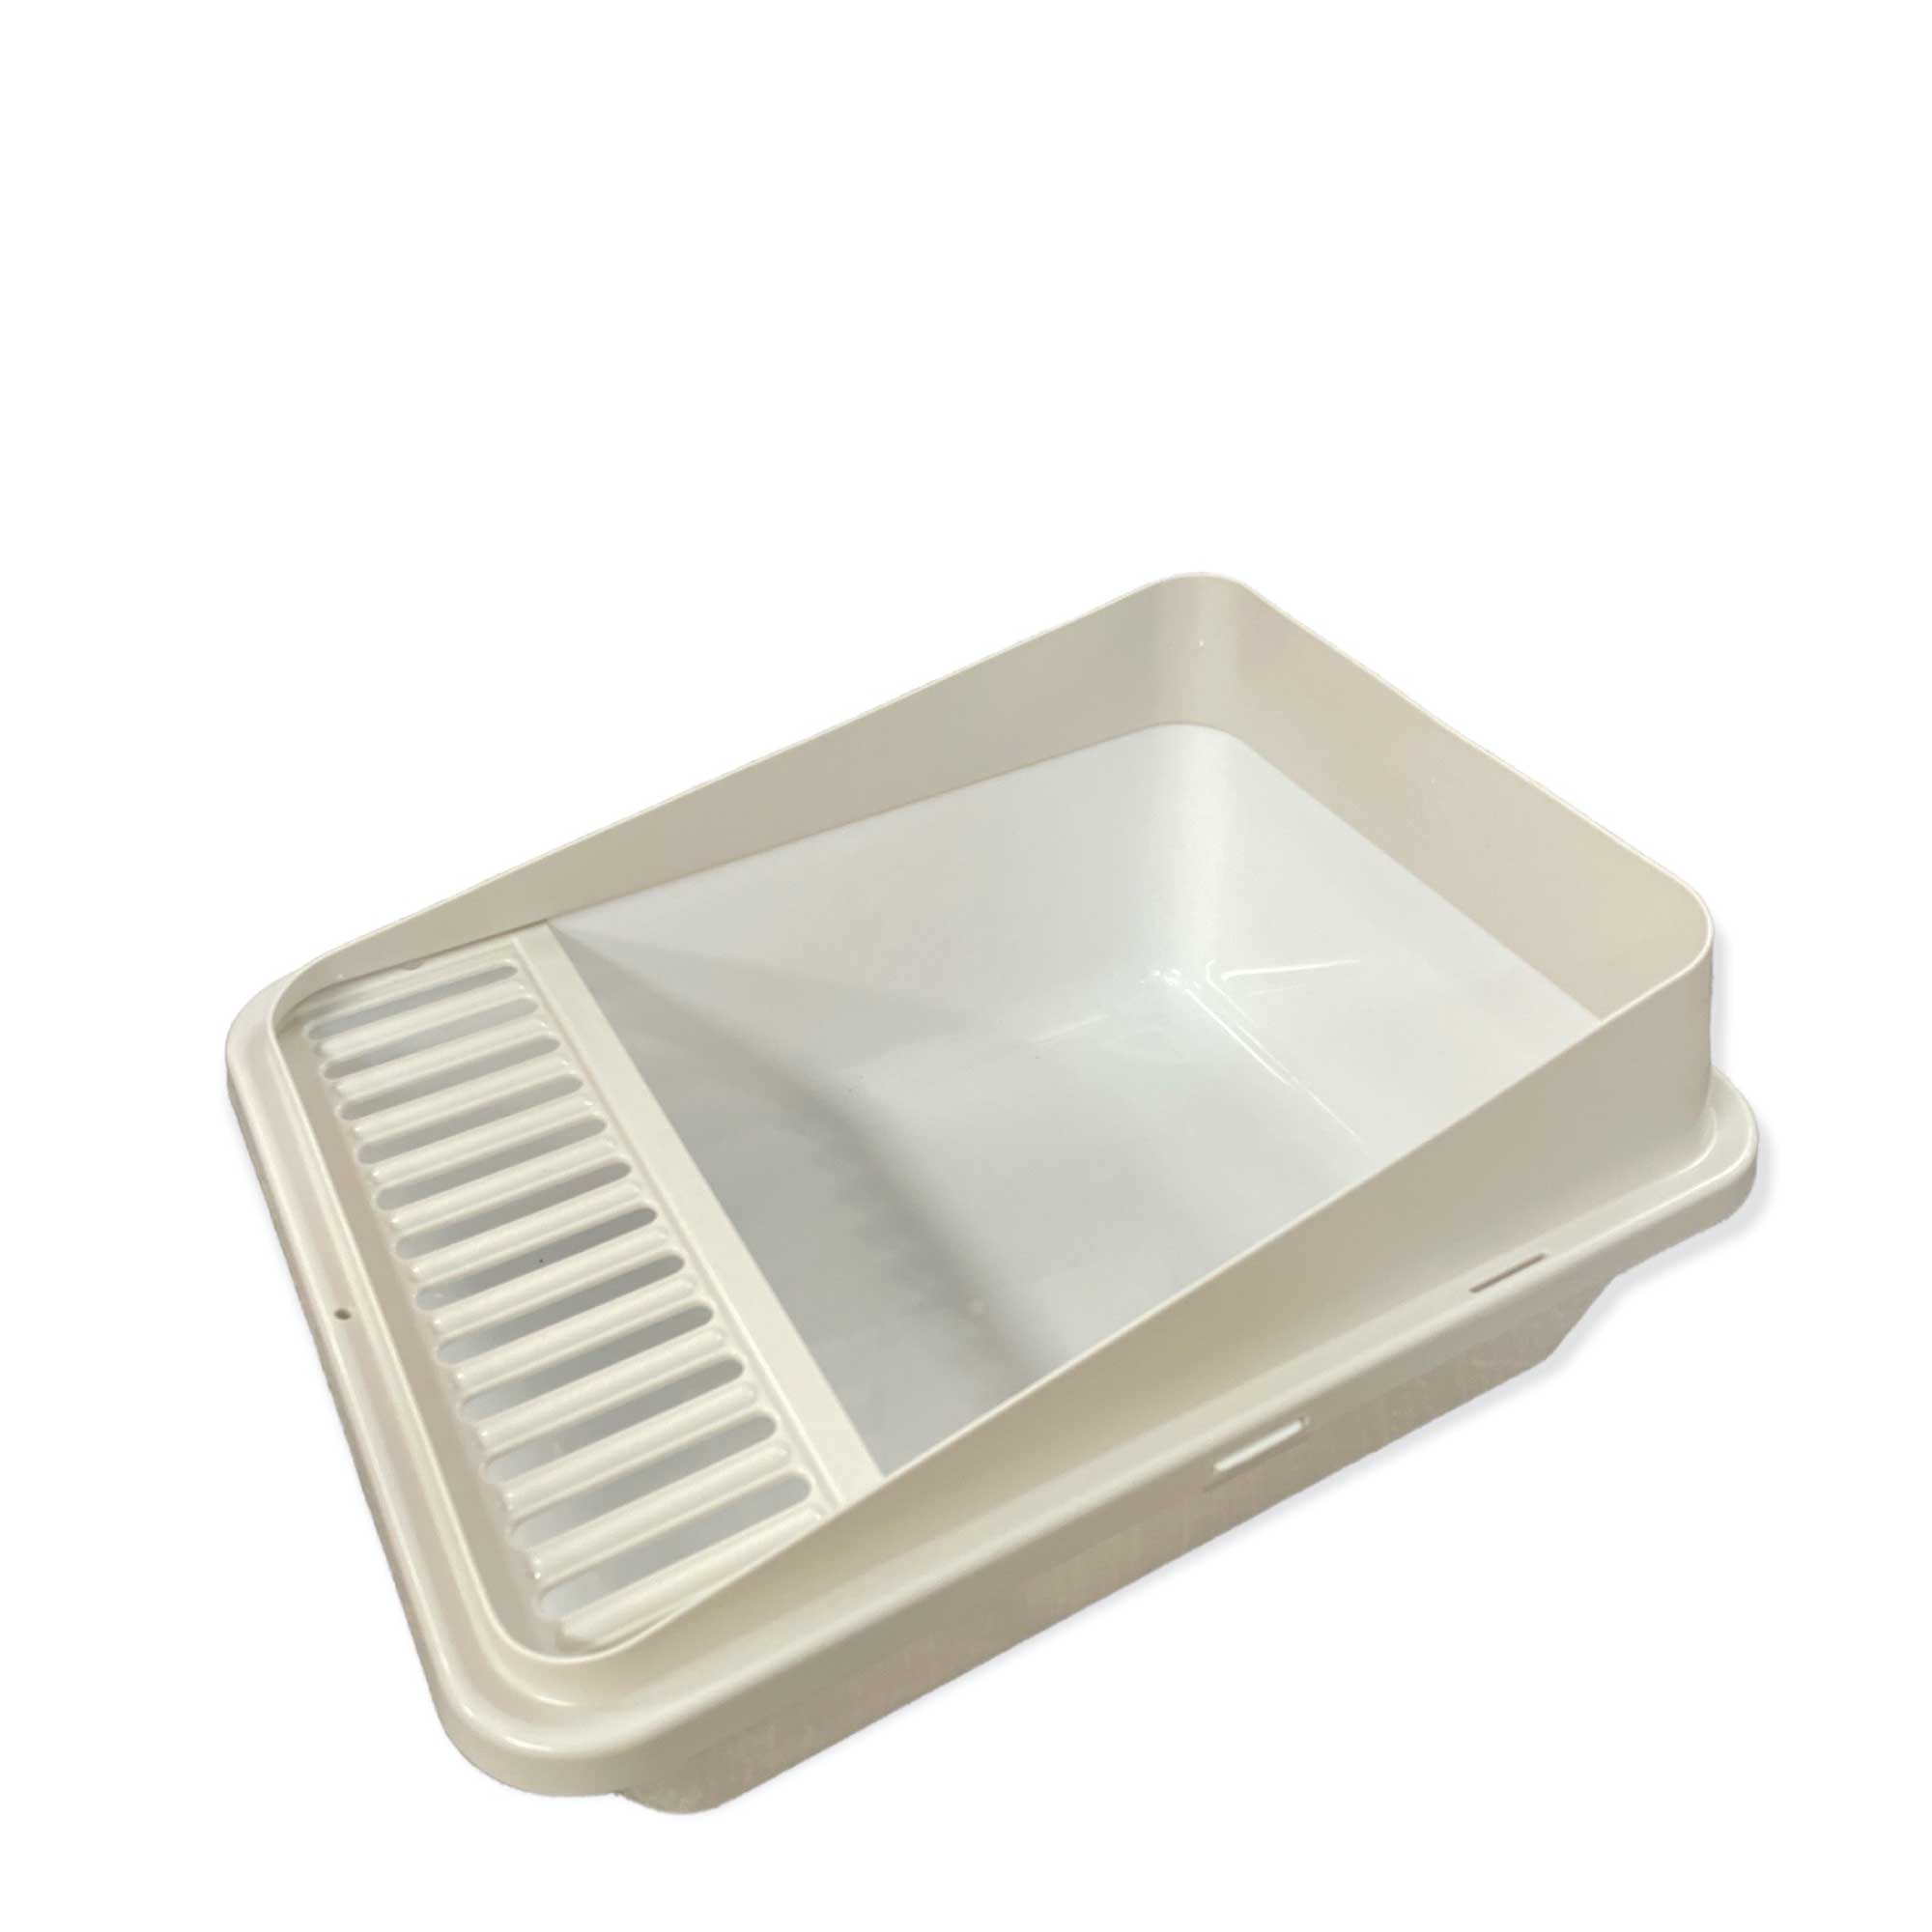 Small High Back Cat Litter Tray - Clean and Fresh